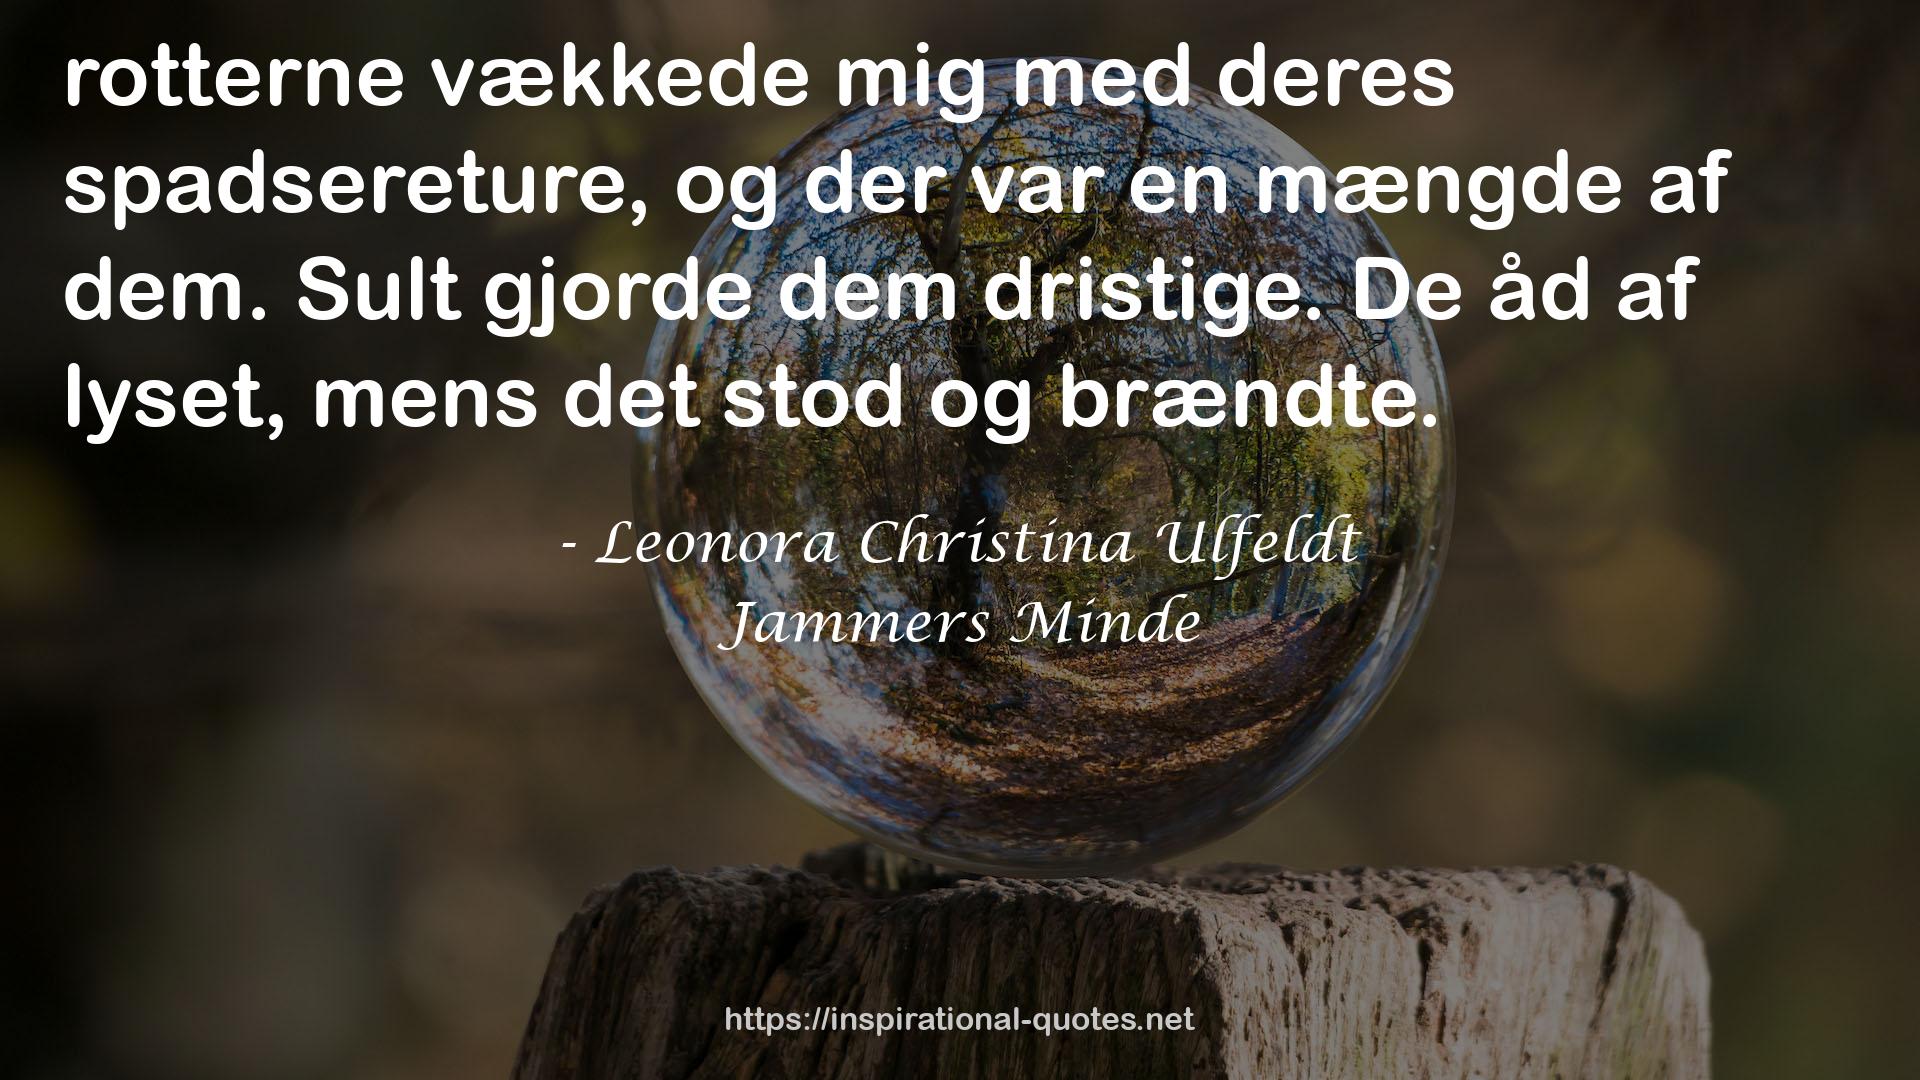 Jammers Minde QUOTES